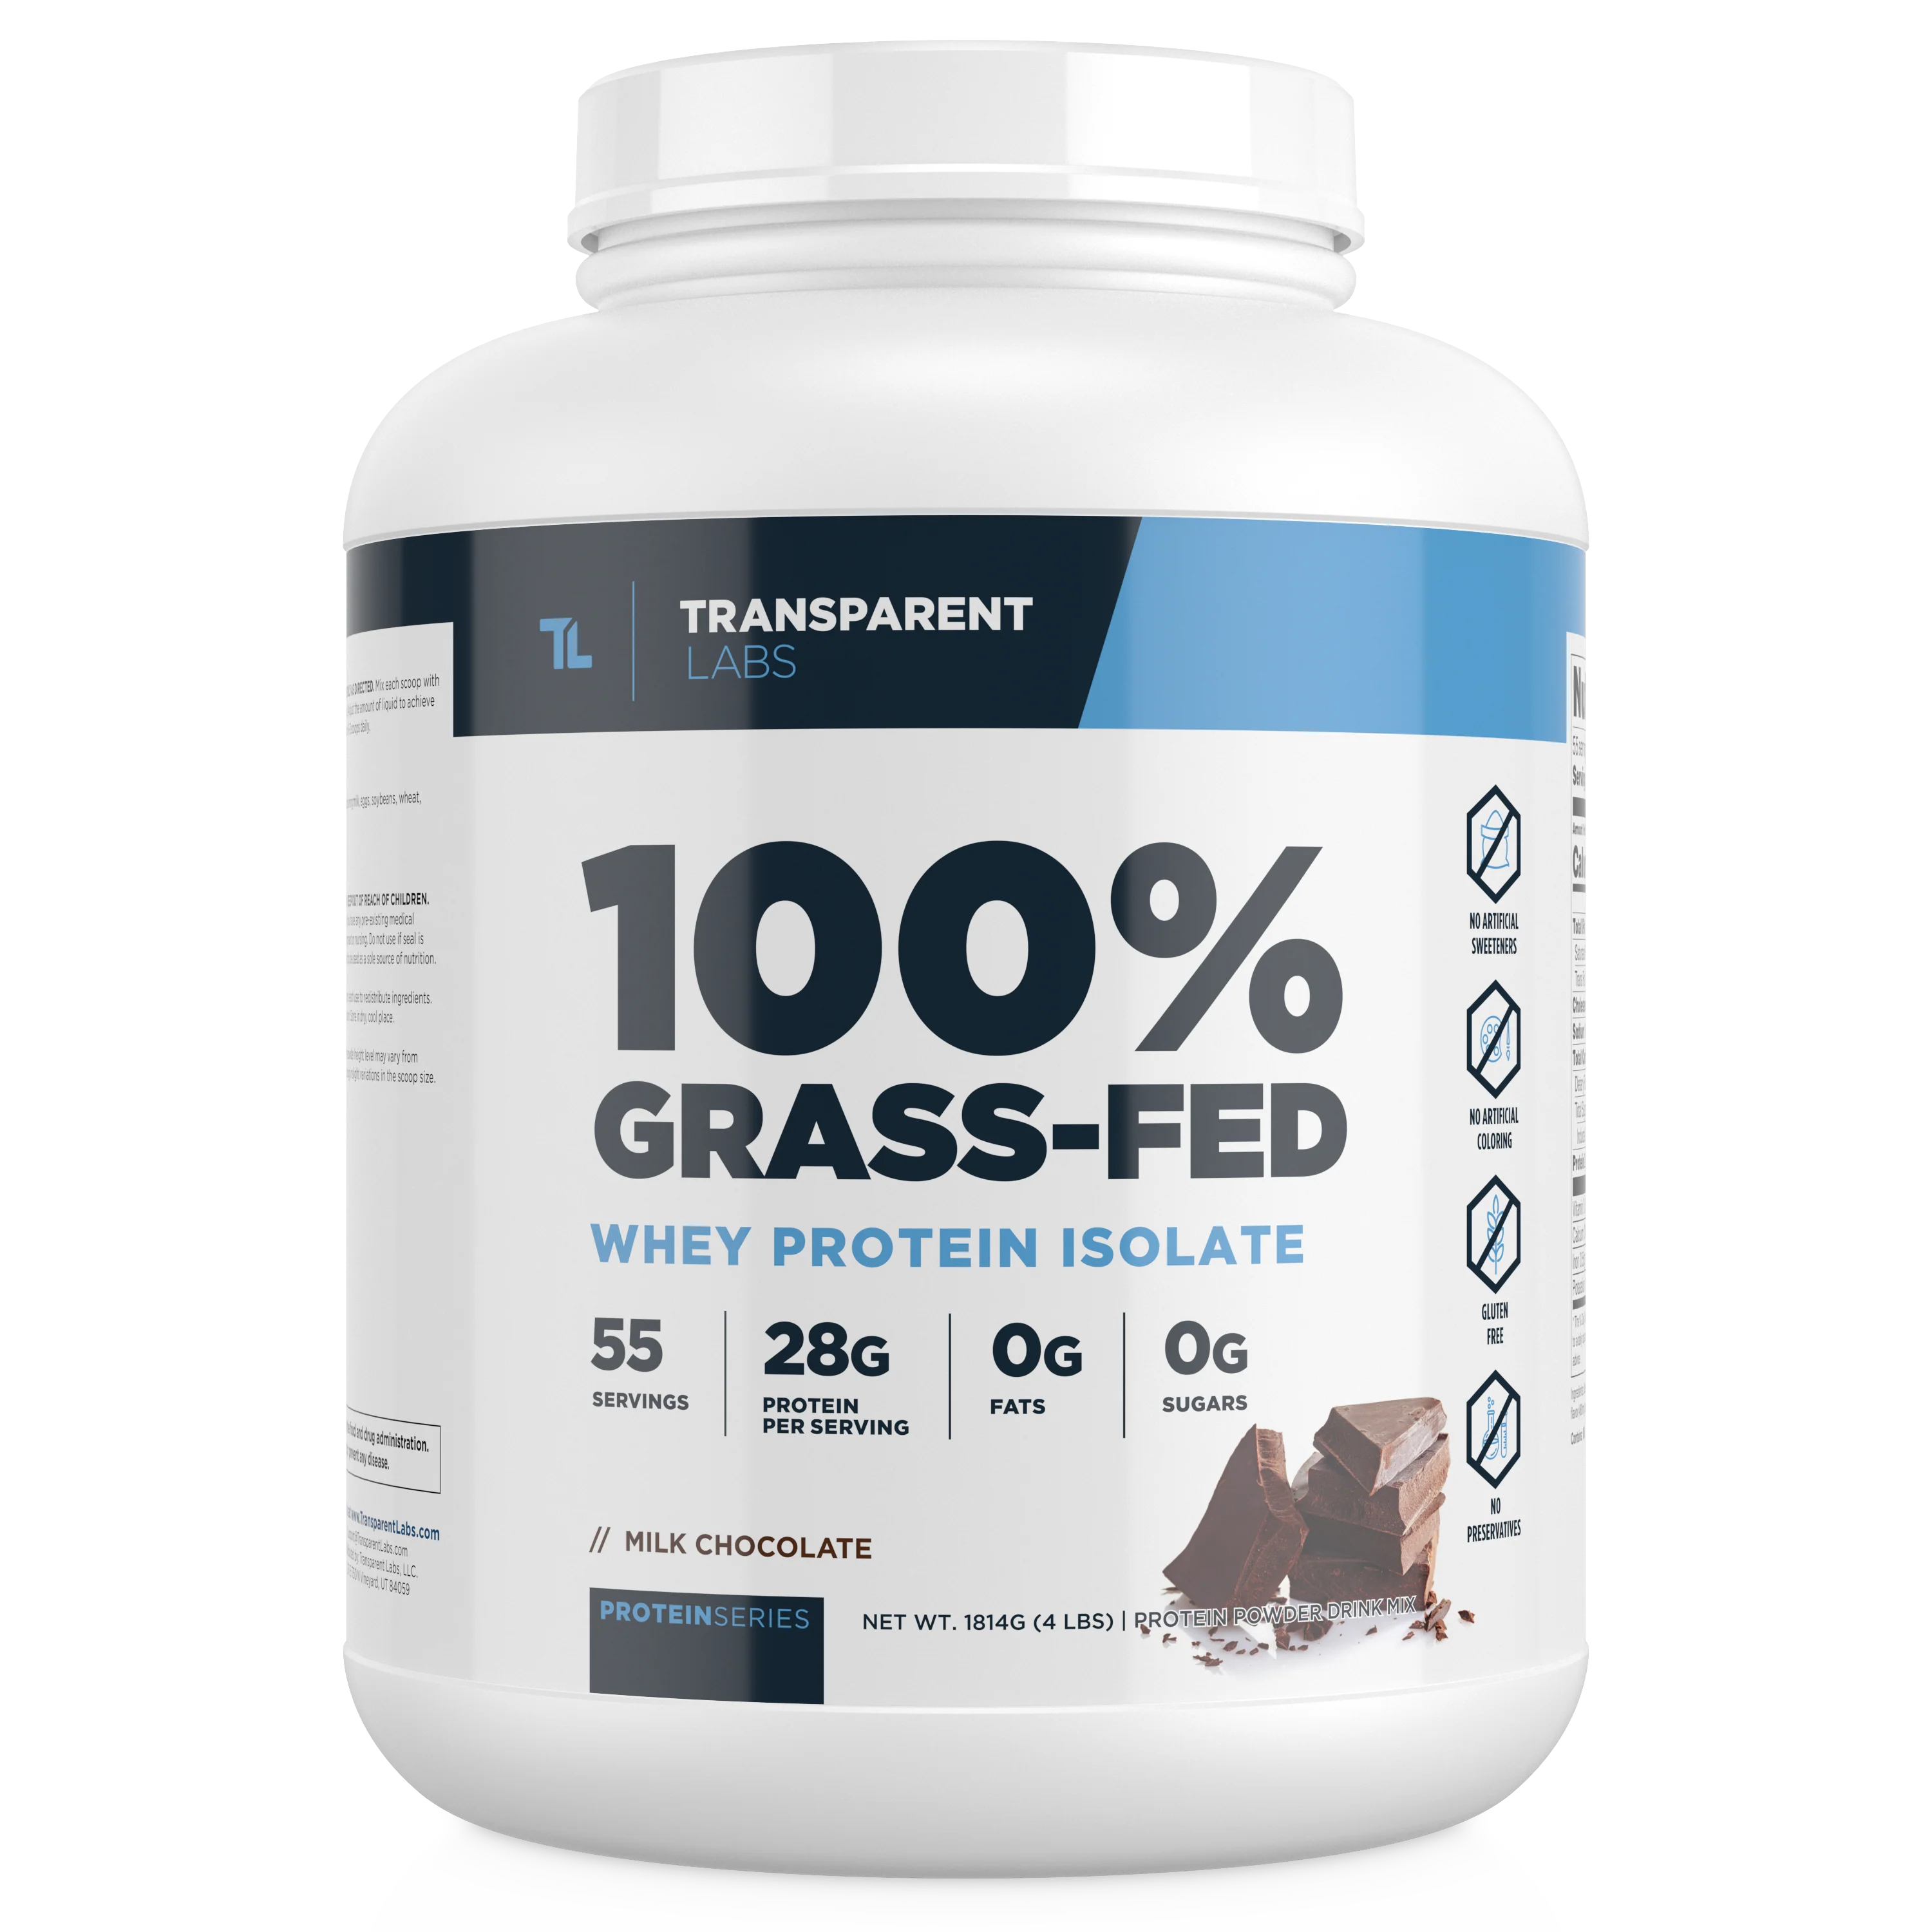 Transparent Labs 100% Grass-Fed Whey Protein Isolate 4lbs (Milk Chocolate)